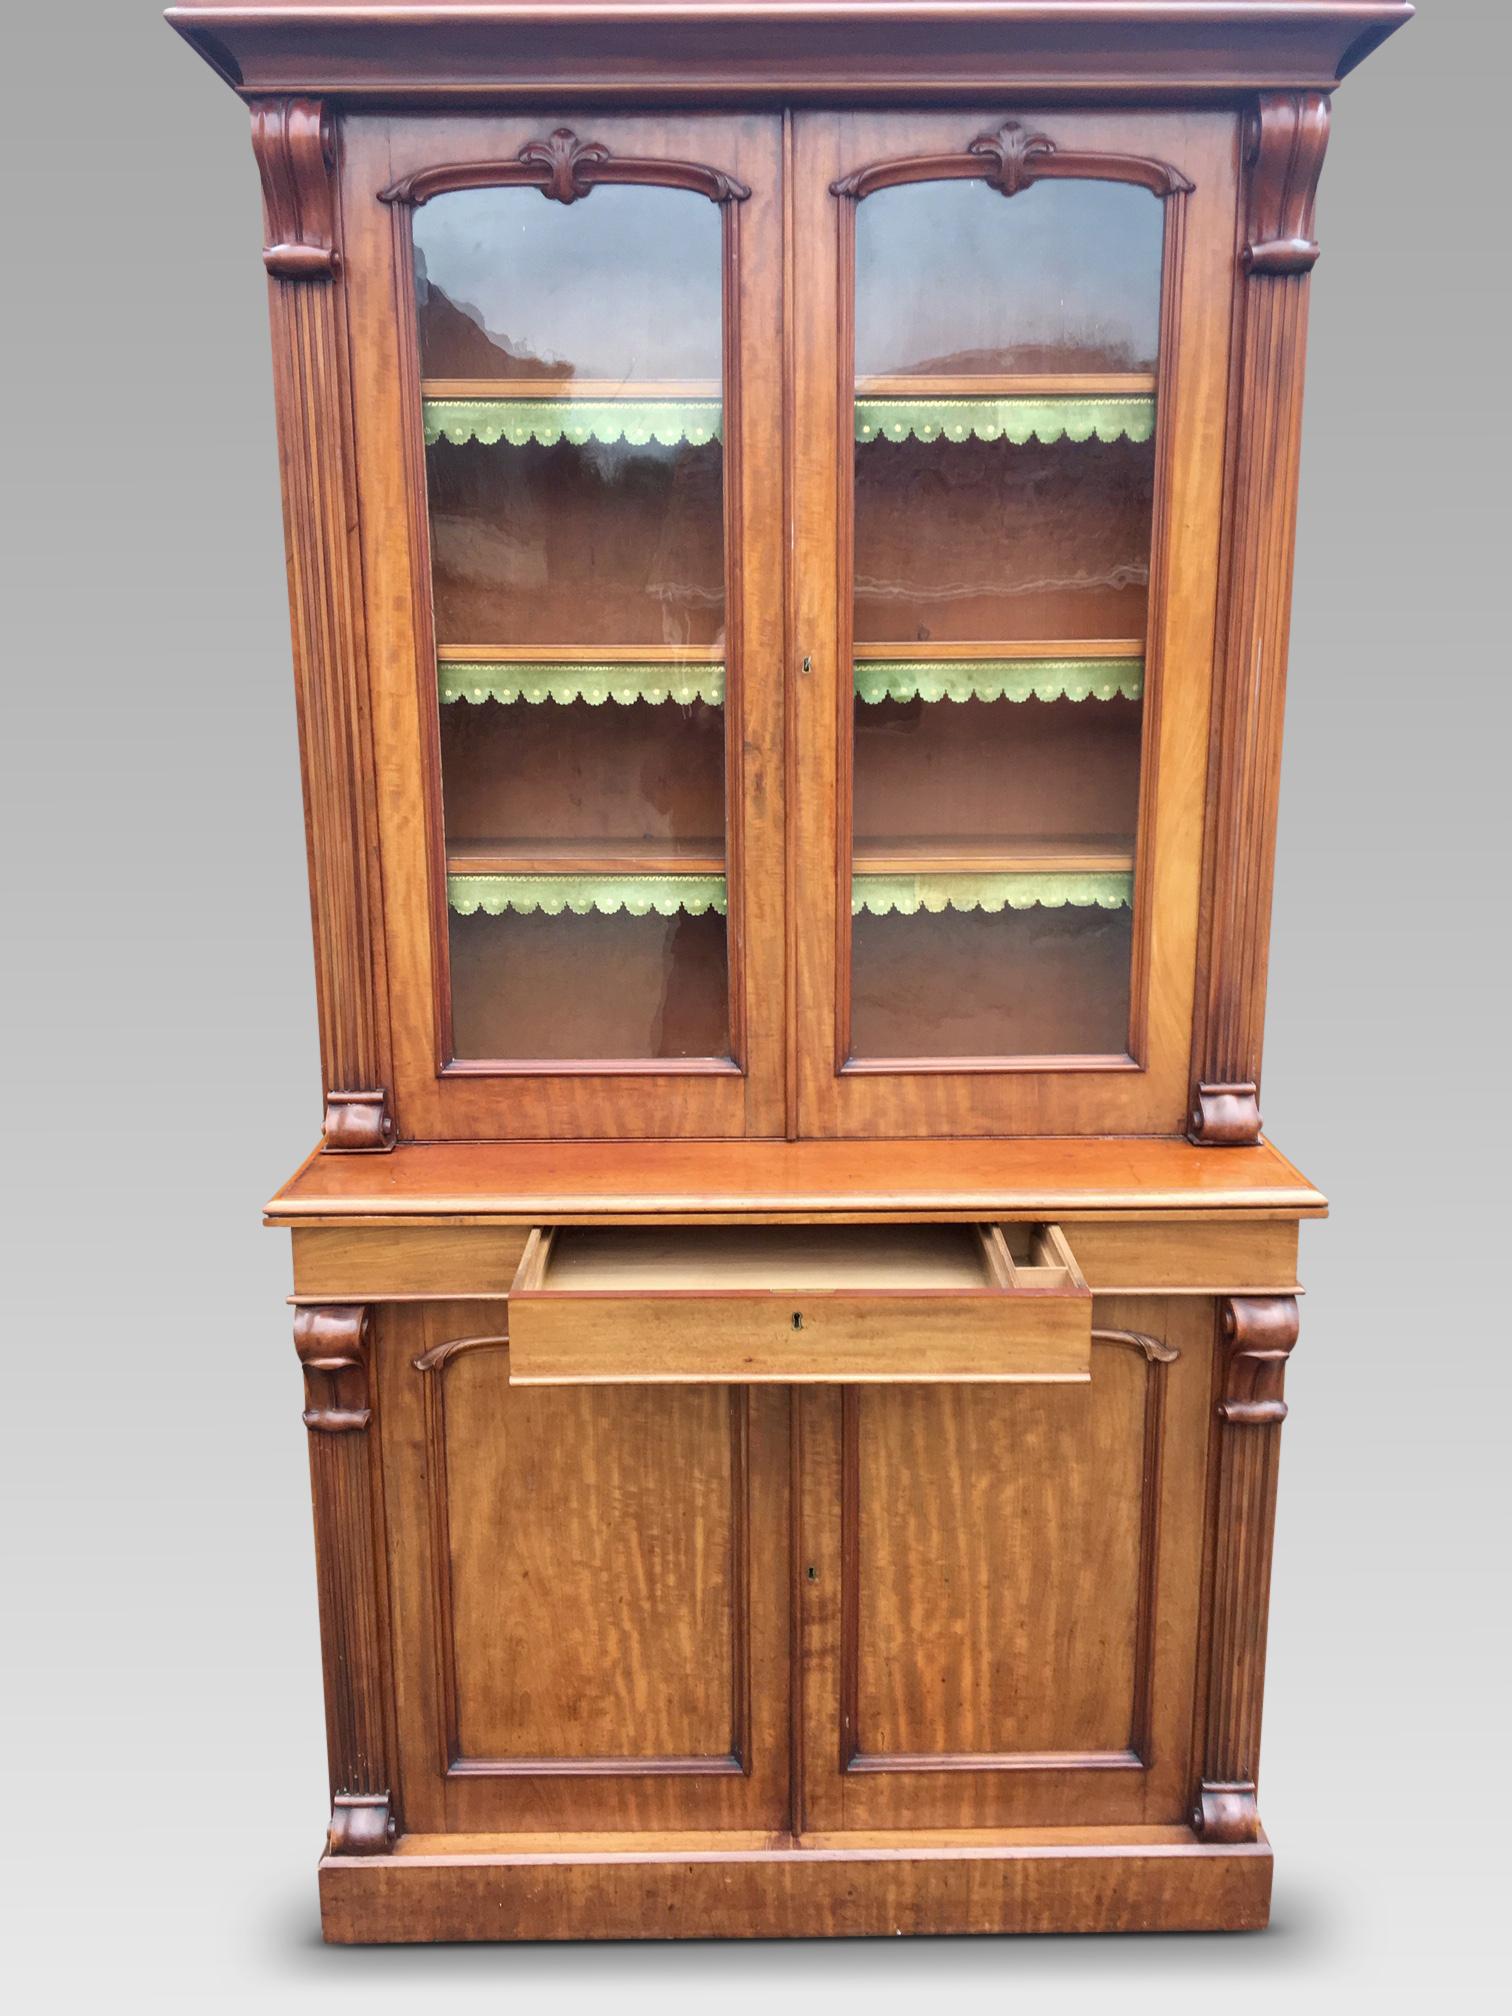 Fine quality Scottish mahogany library bookcase, circa 1880 in excellent condition.
It has a superb color with an original finish and a mellow antique patina.
The shelves are adjustable, have a book depth of 9 inches and have the original
green